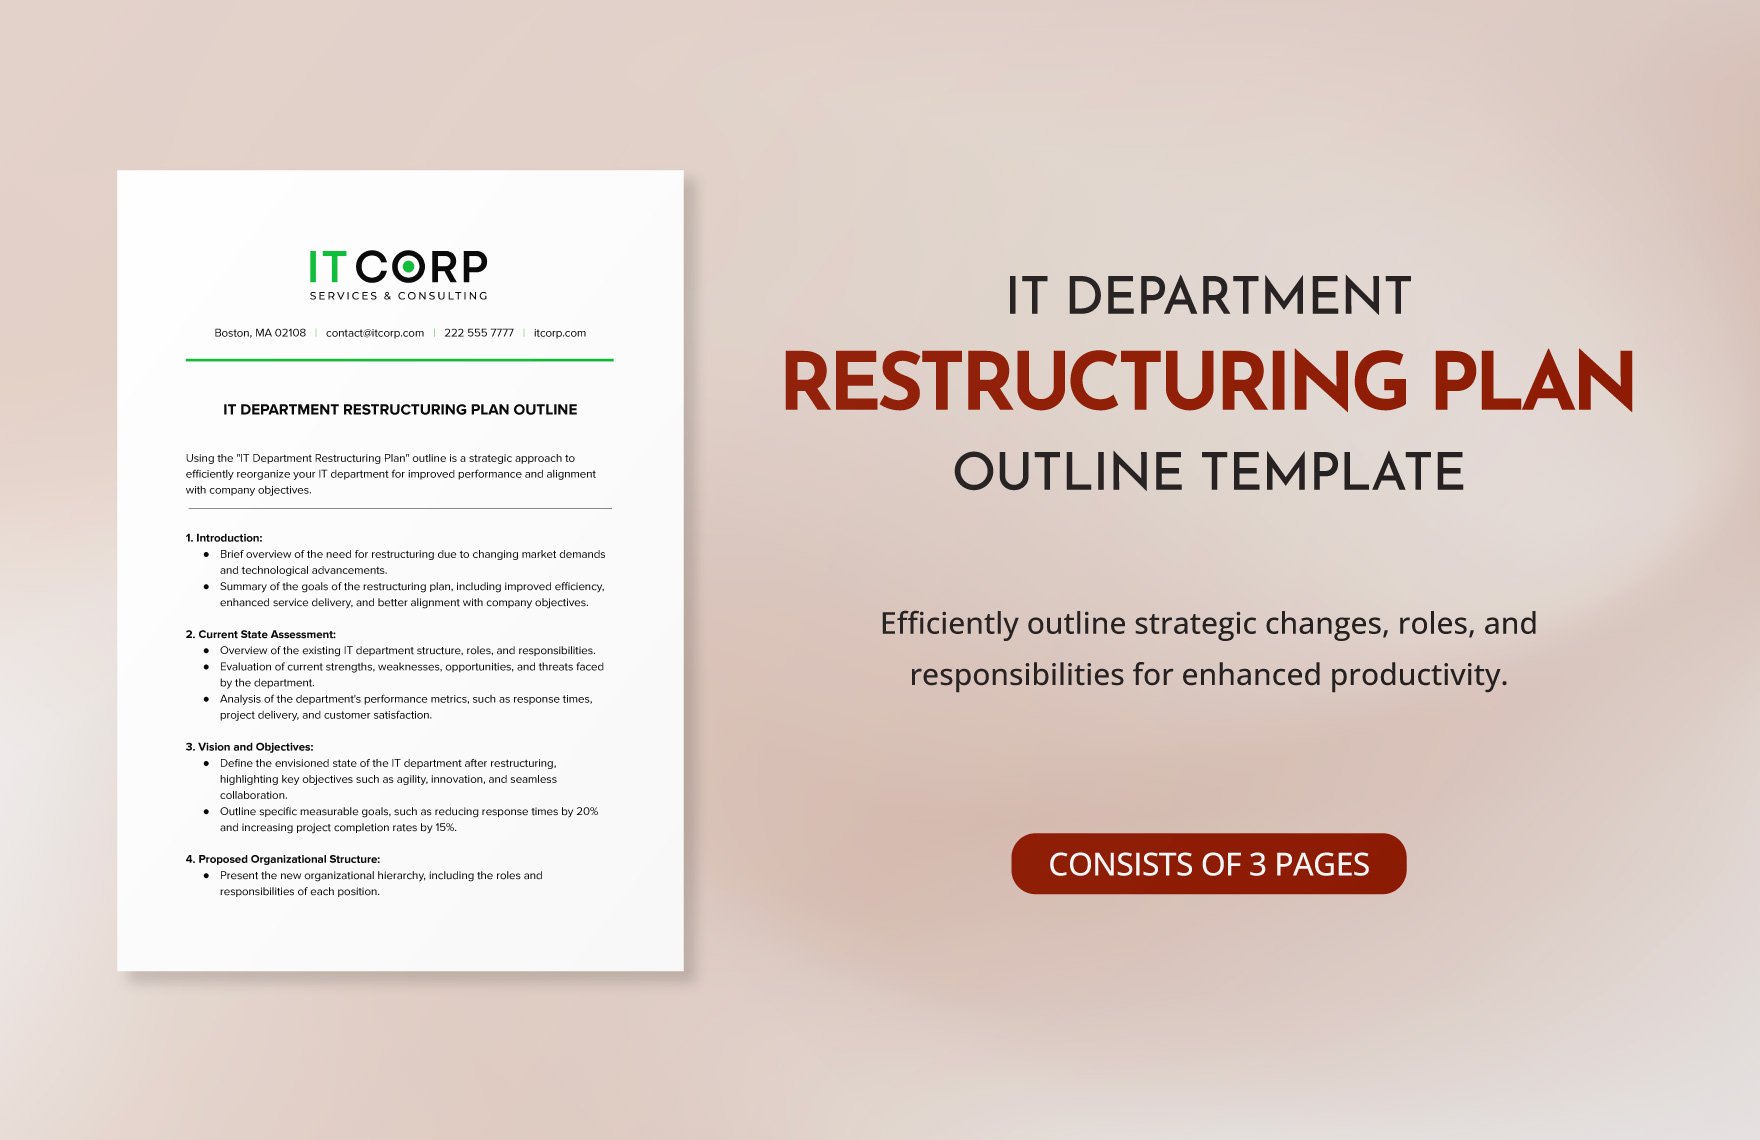 IT Department Restructuring Plan Outline Template